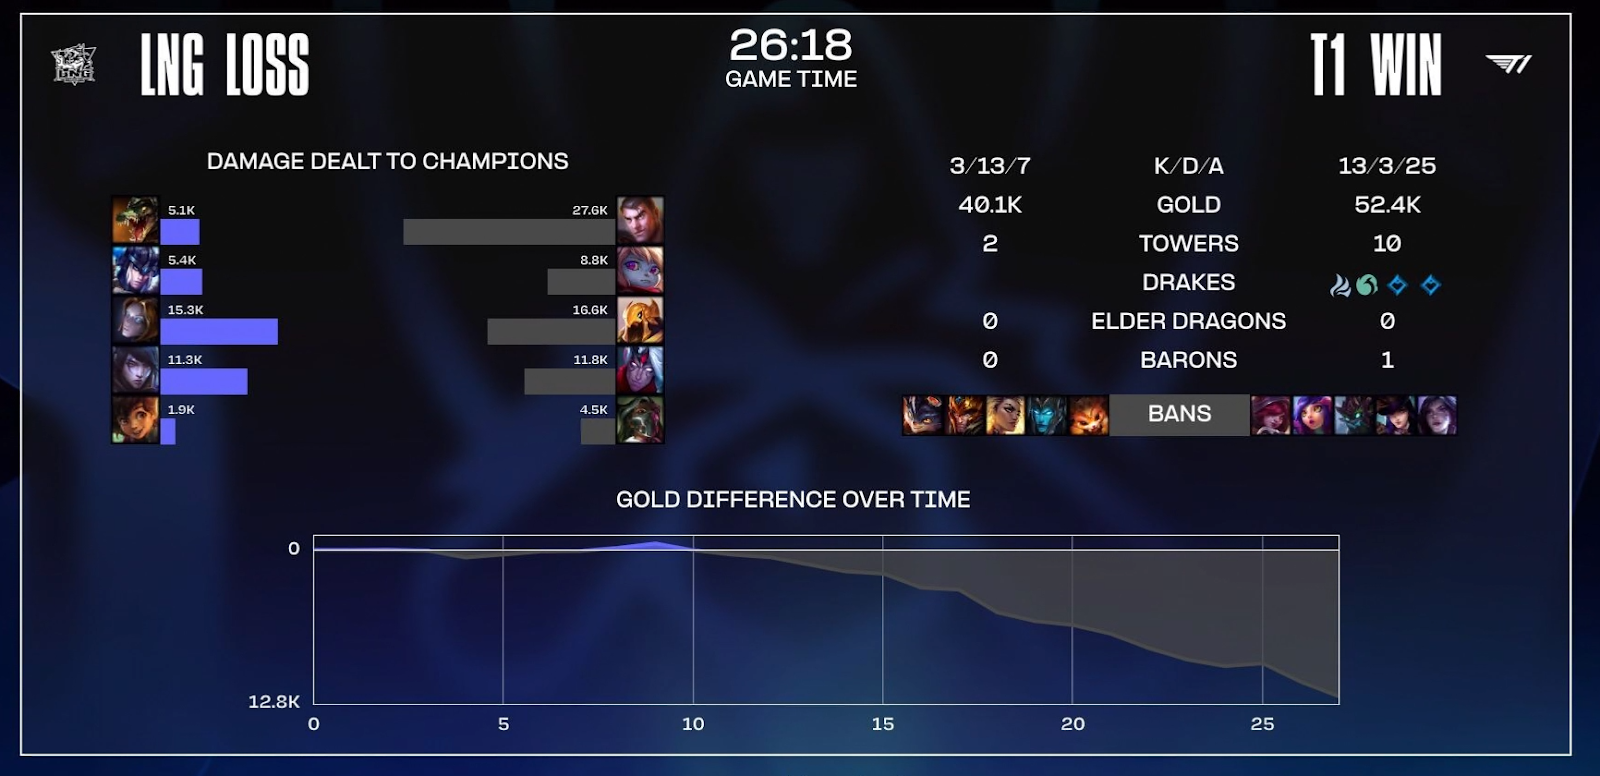 Game 3 graphic from T1 vs LNG